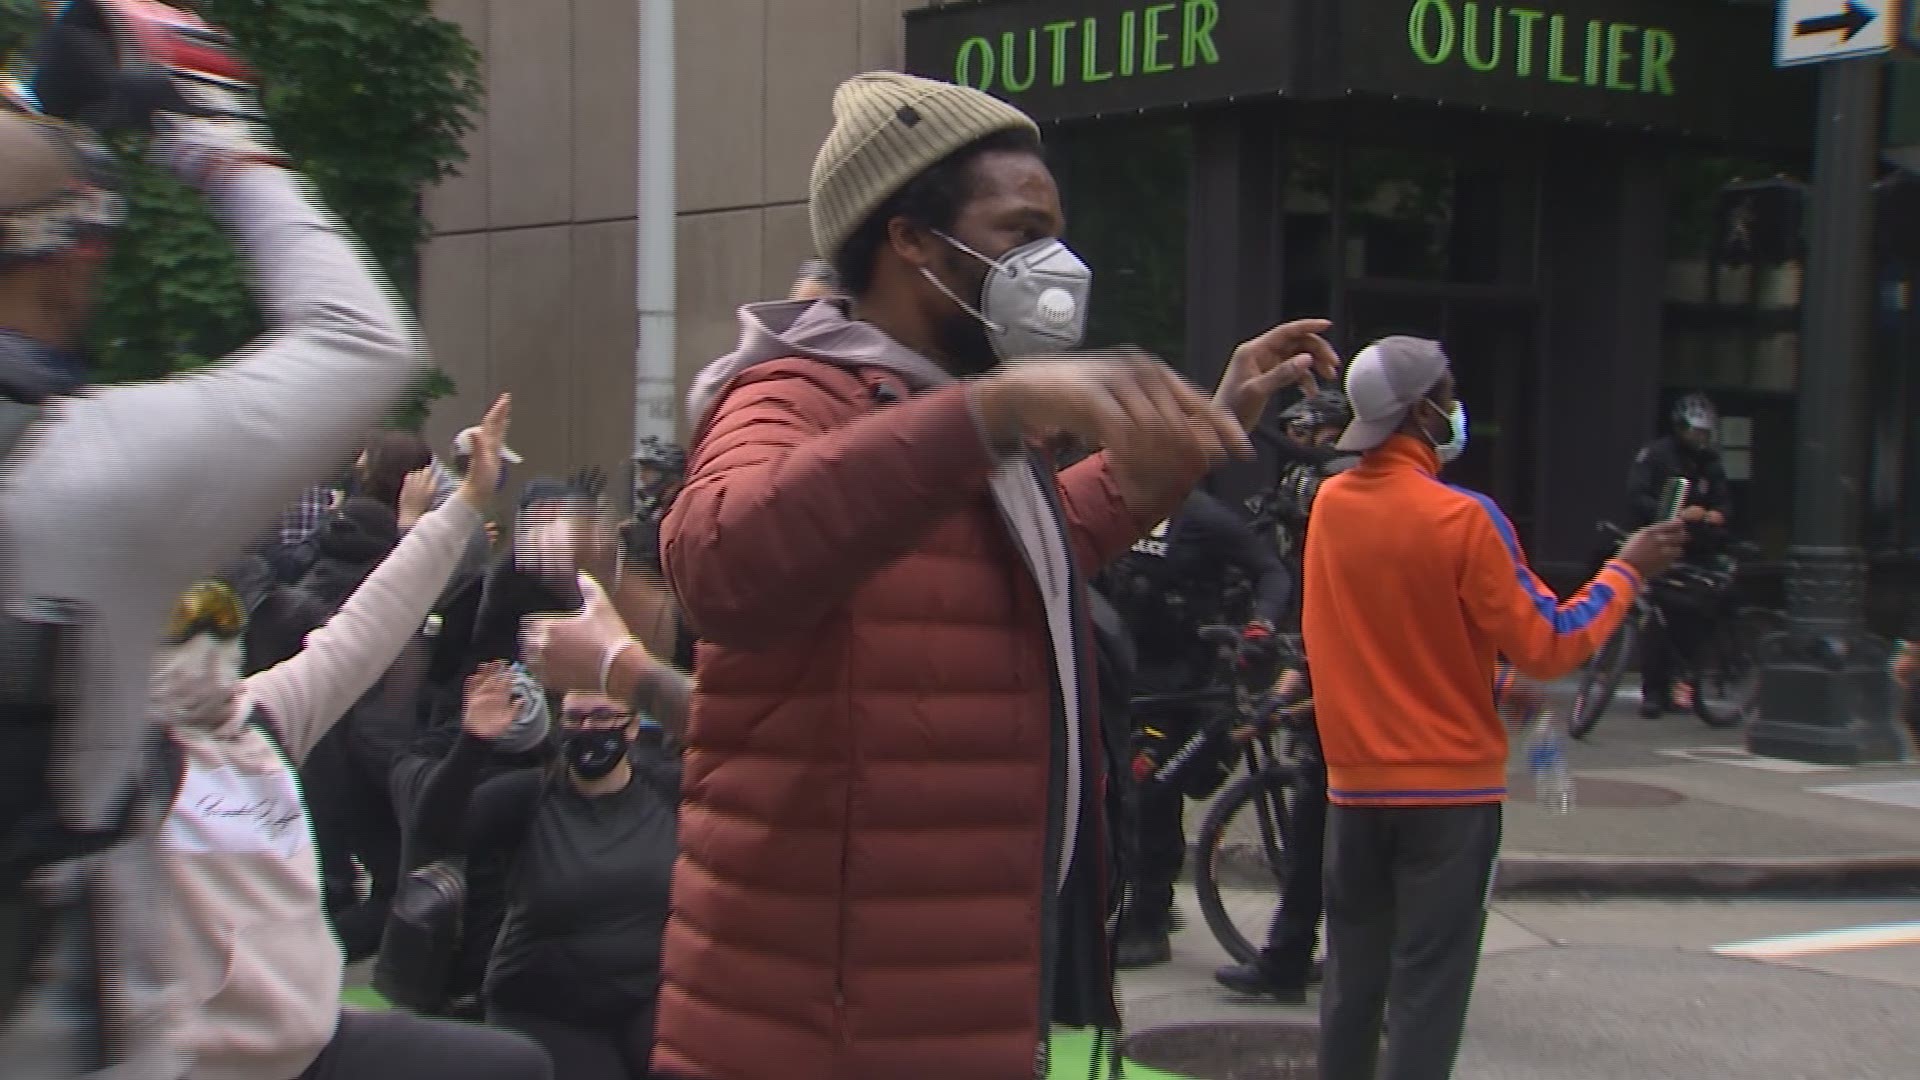 About 10,000 people took to the streets of Seattle on Saturday in protest, causing concern for health experts that coronavirus could spread.